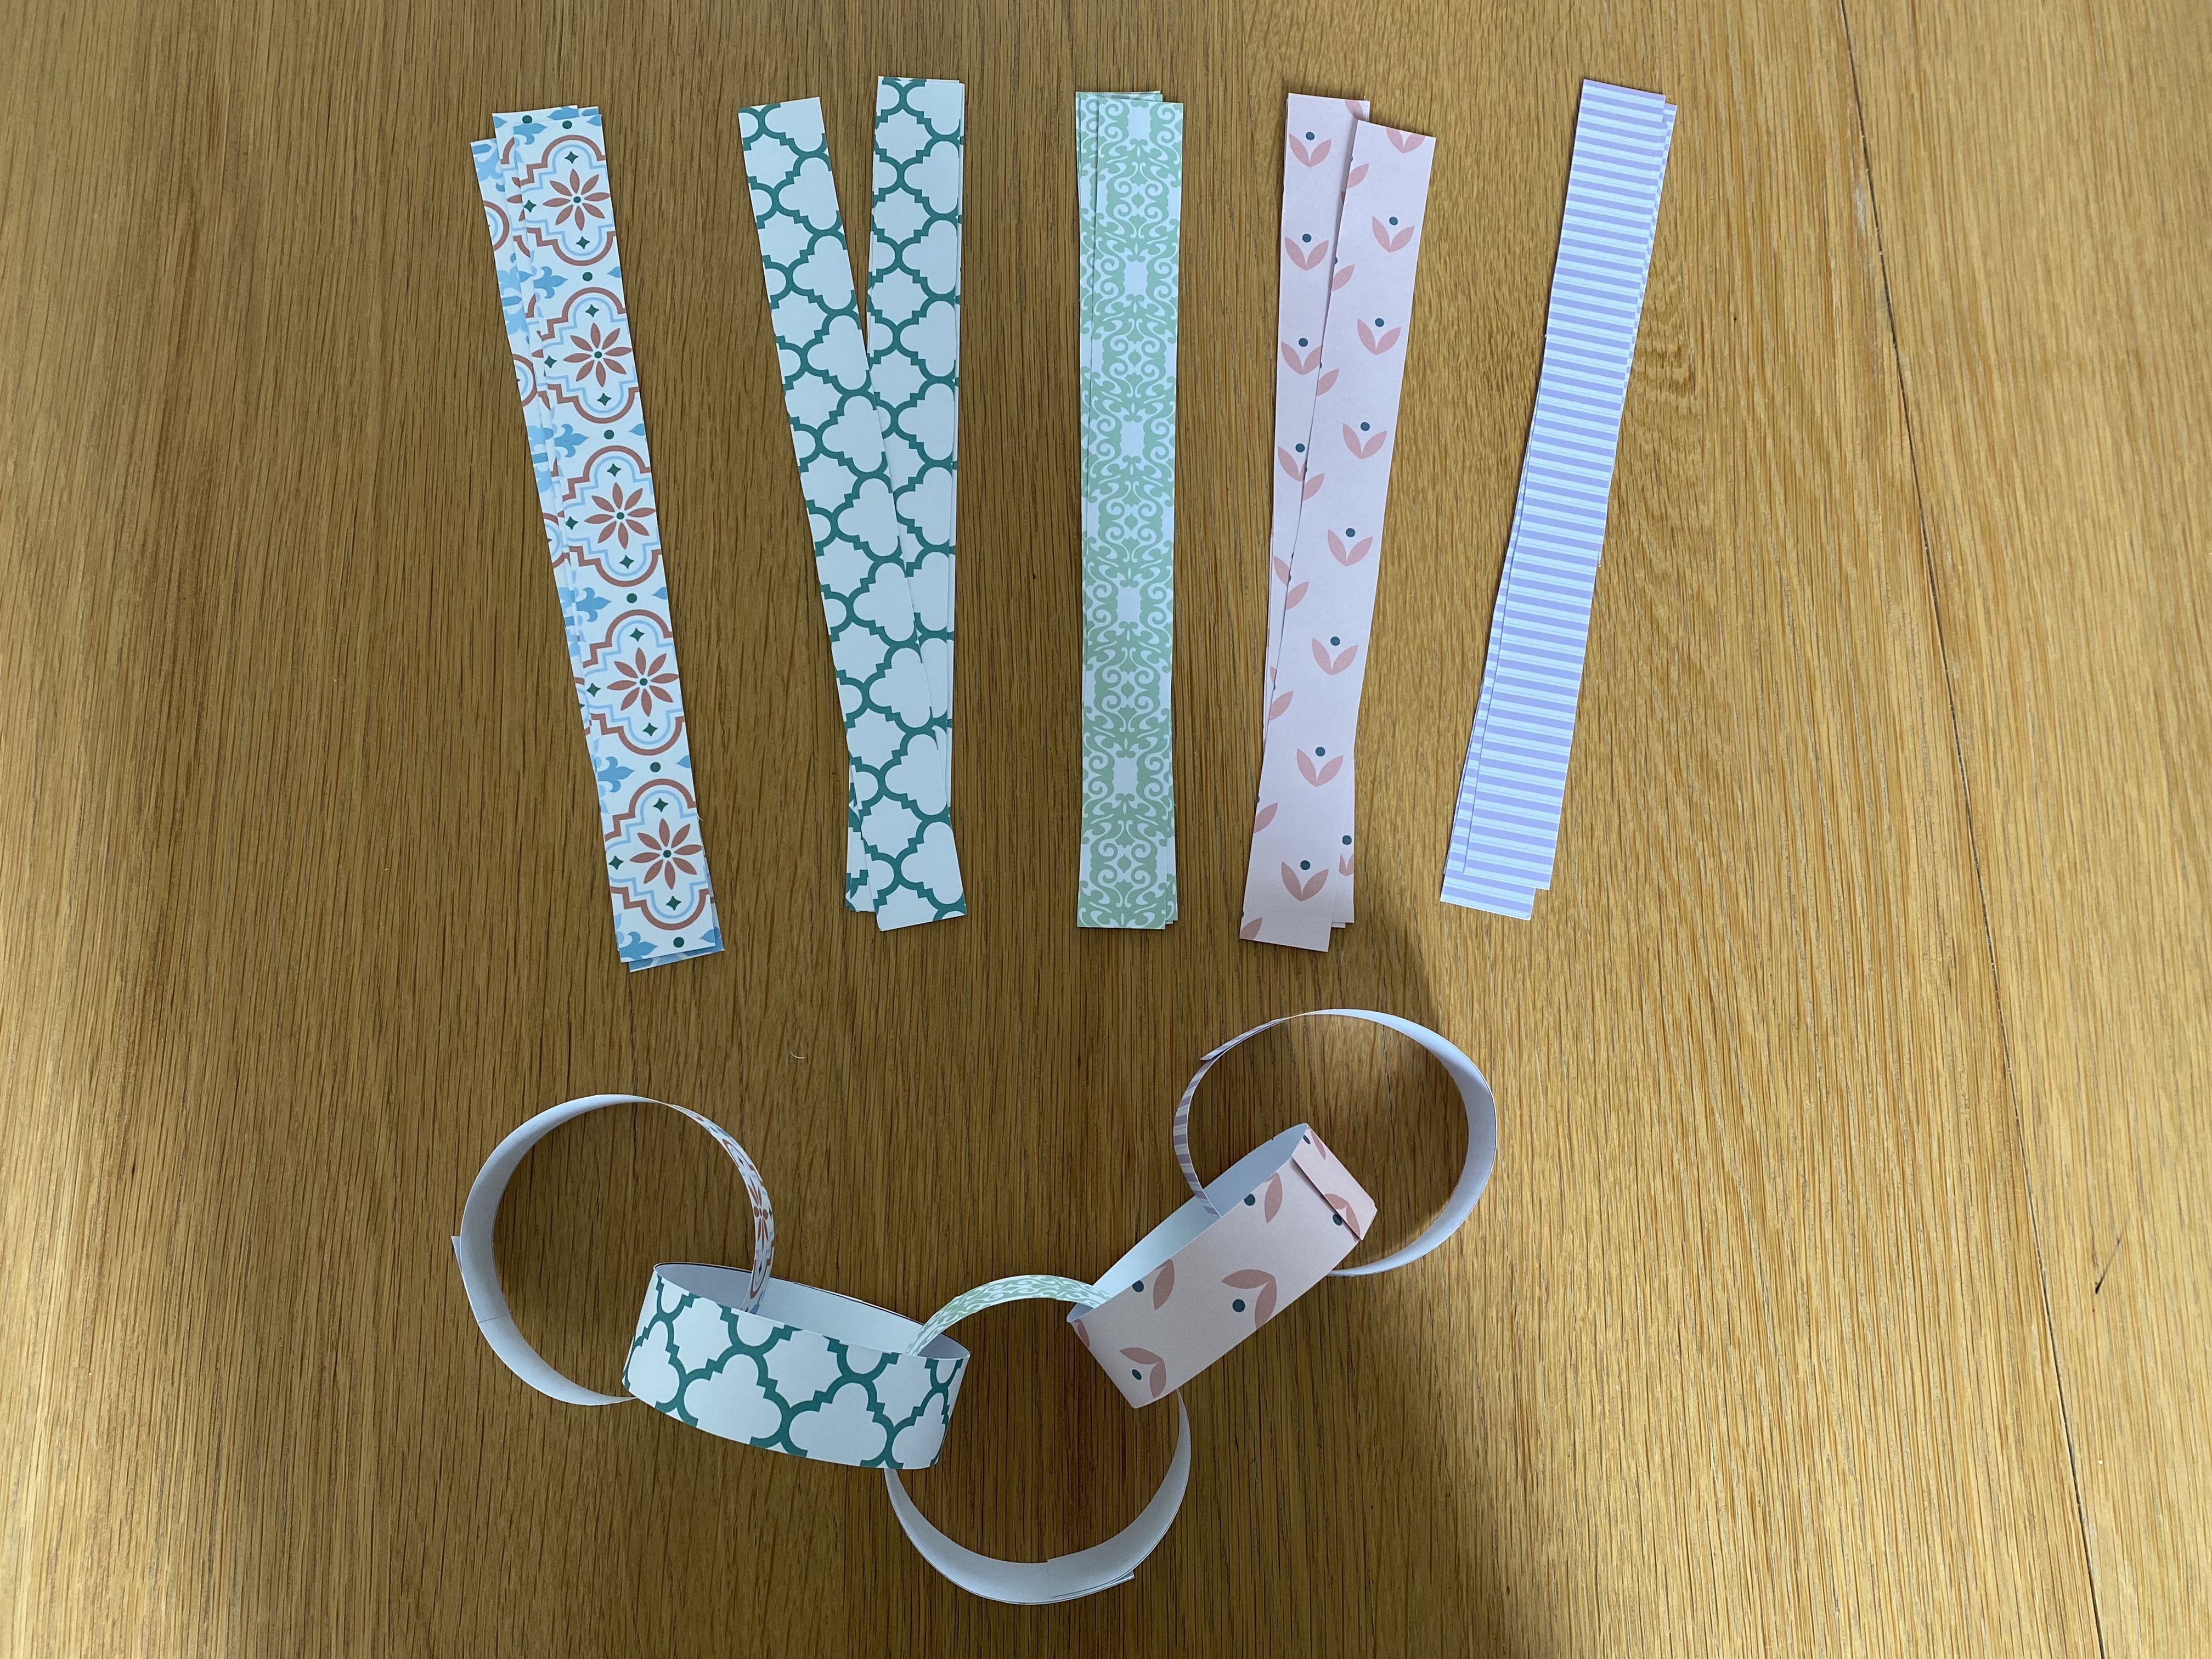 Paper Chain Made in Four Simple Steps - DIY Candy